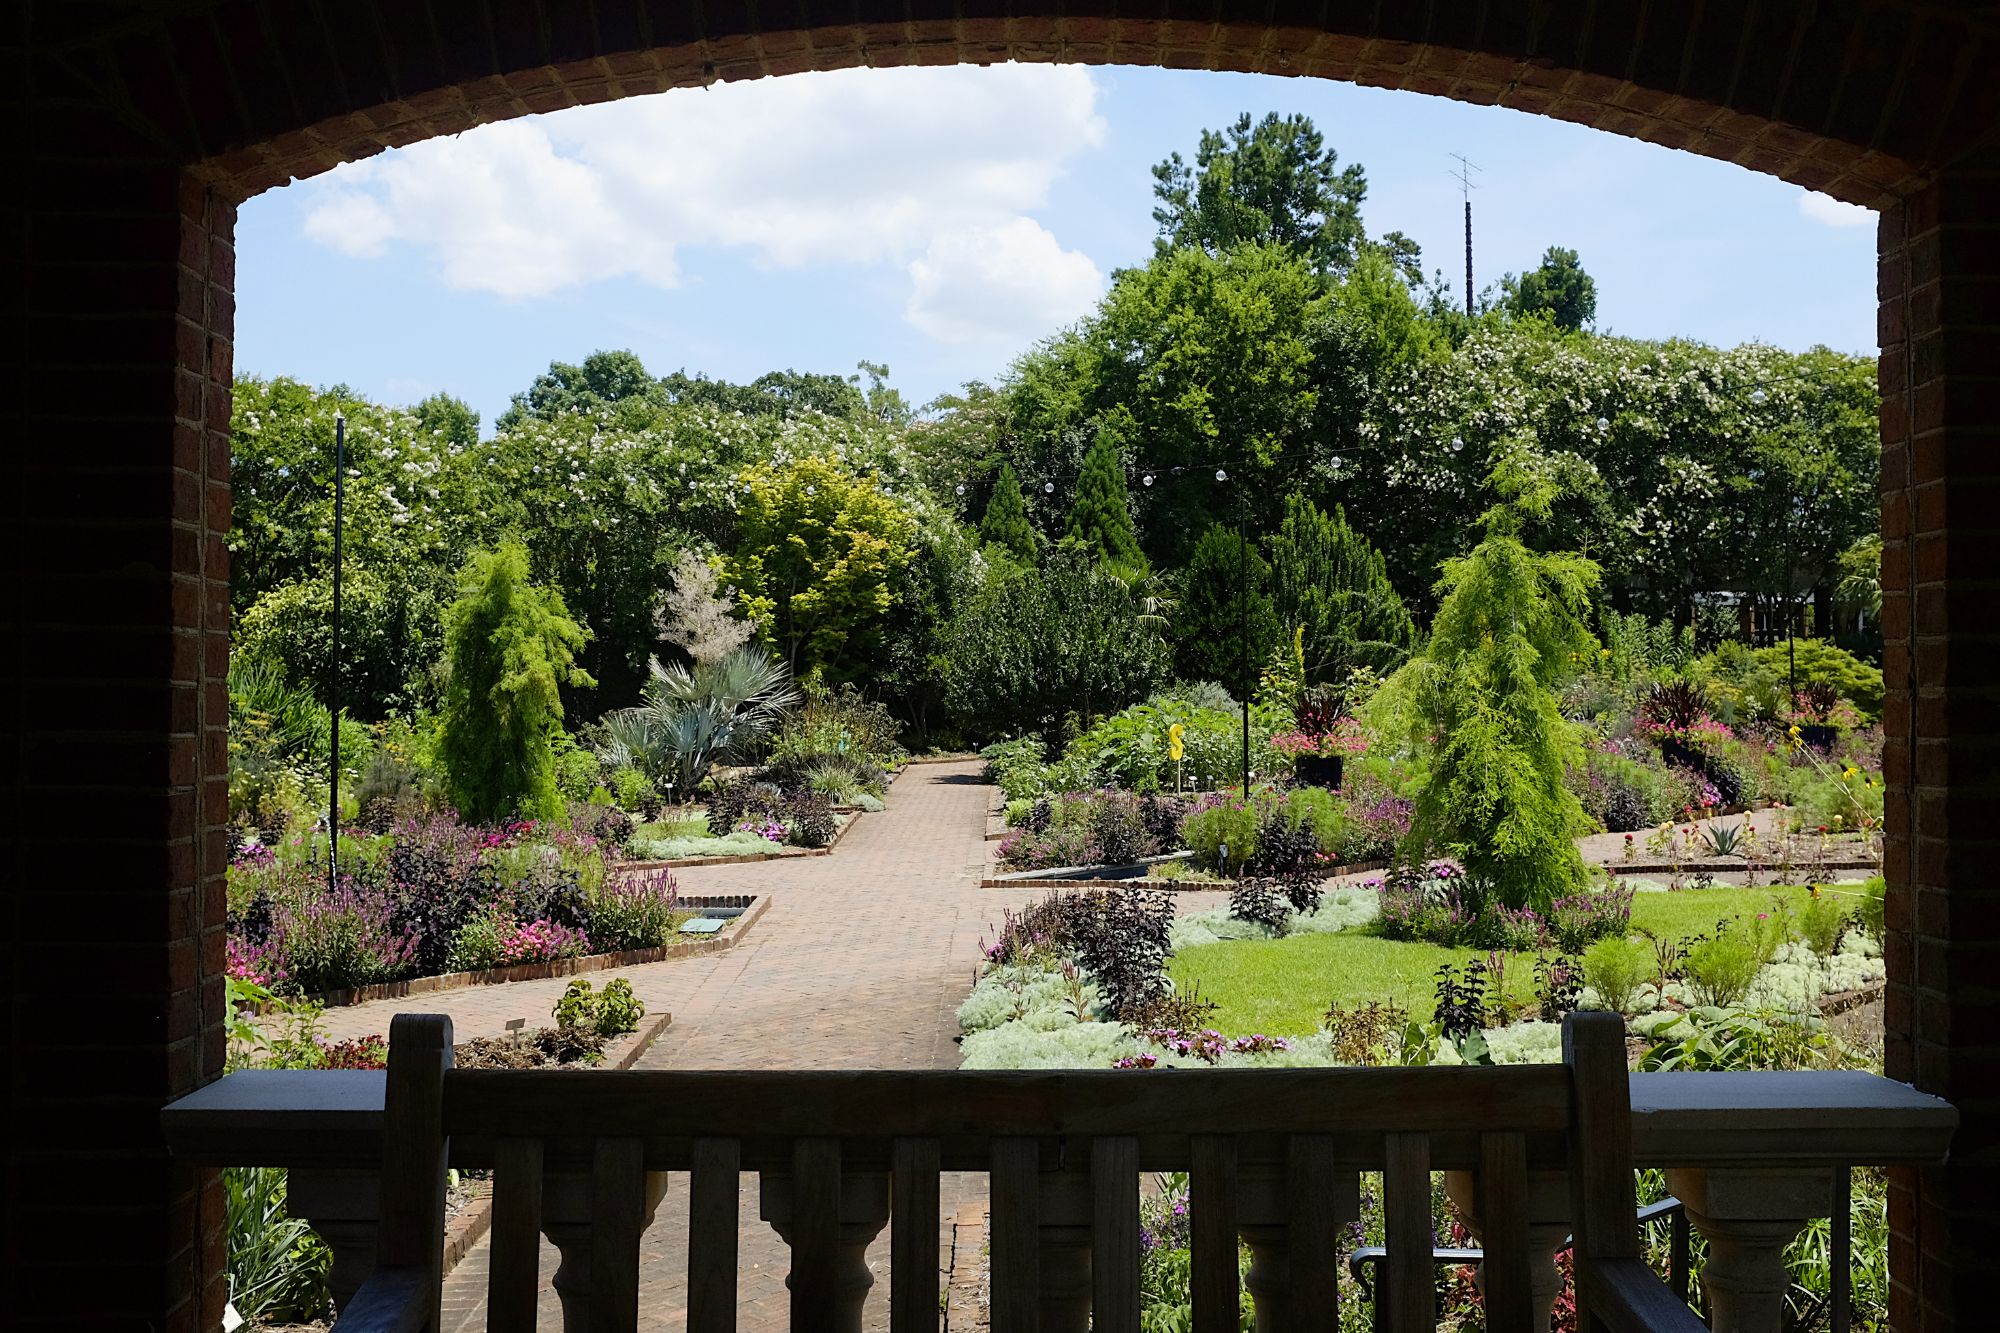 View of the Gardens at the Riverbanks Zoo and Garden